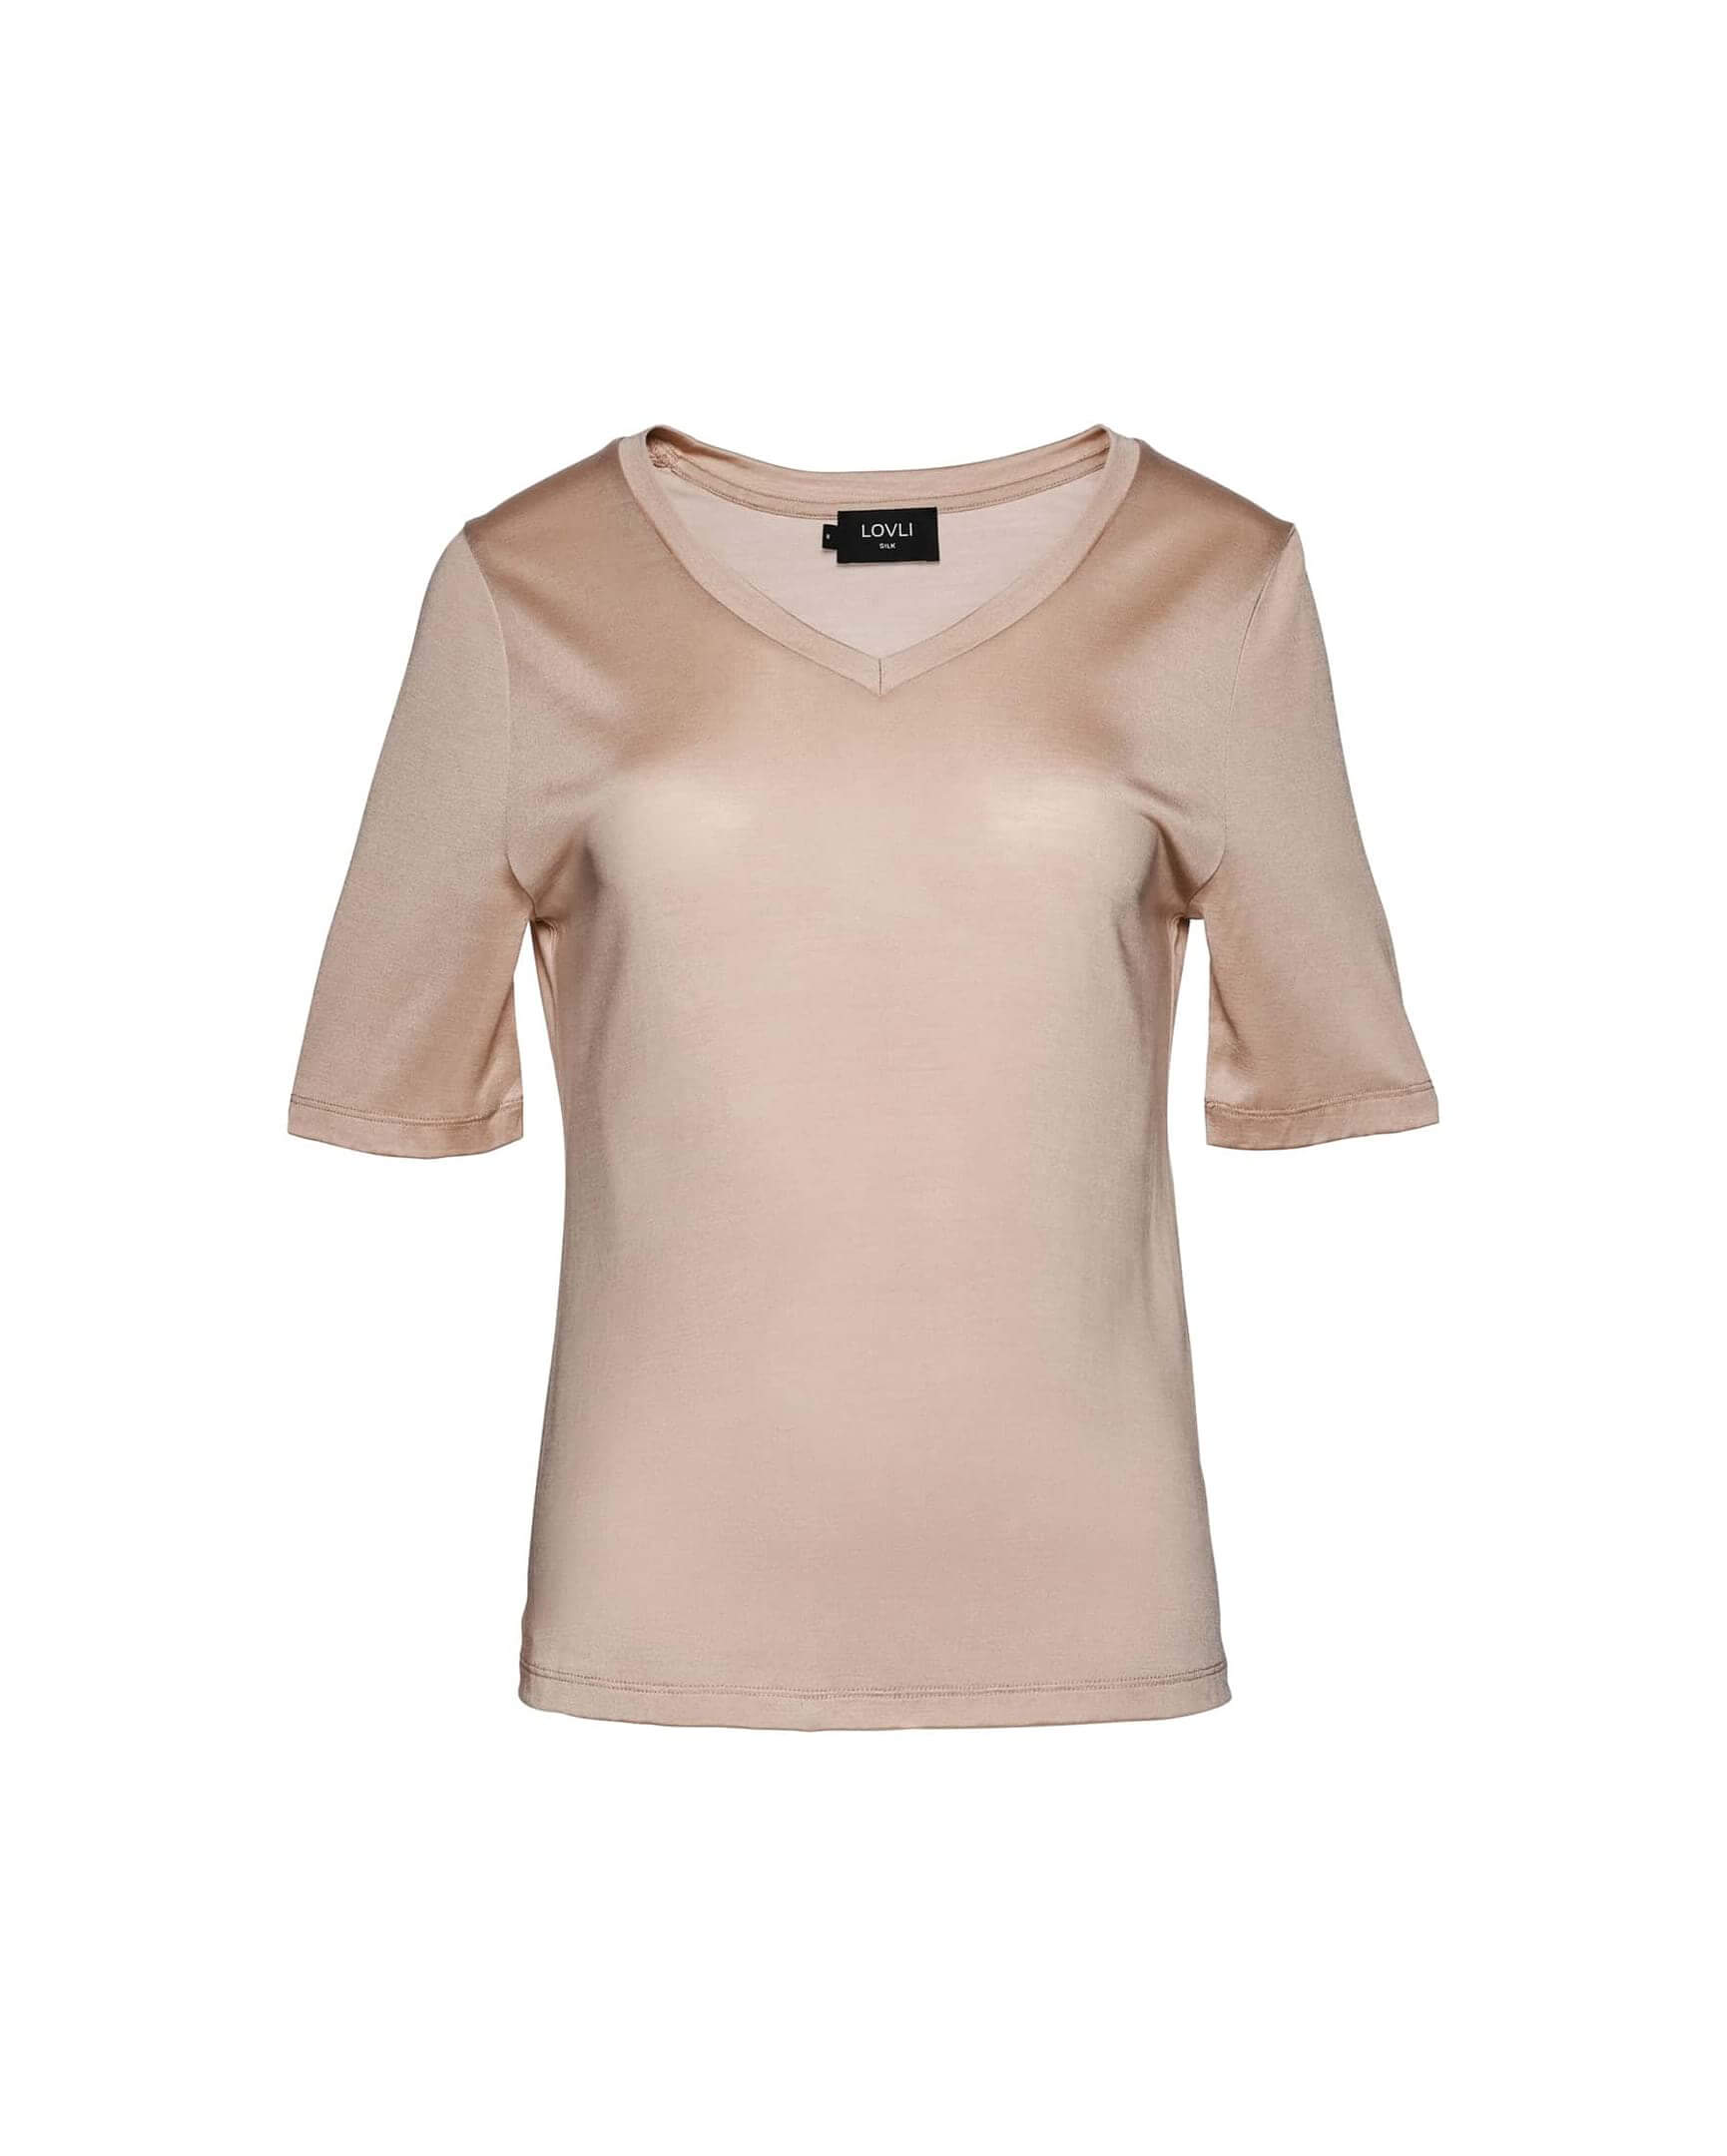 Silk V-neck T-shirt in nude